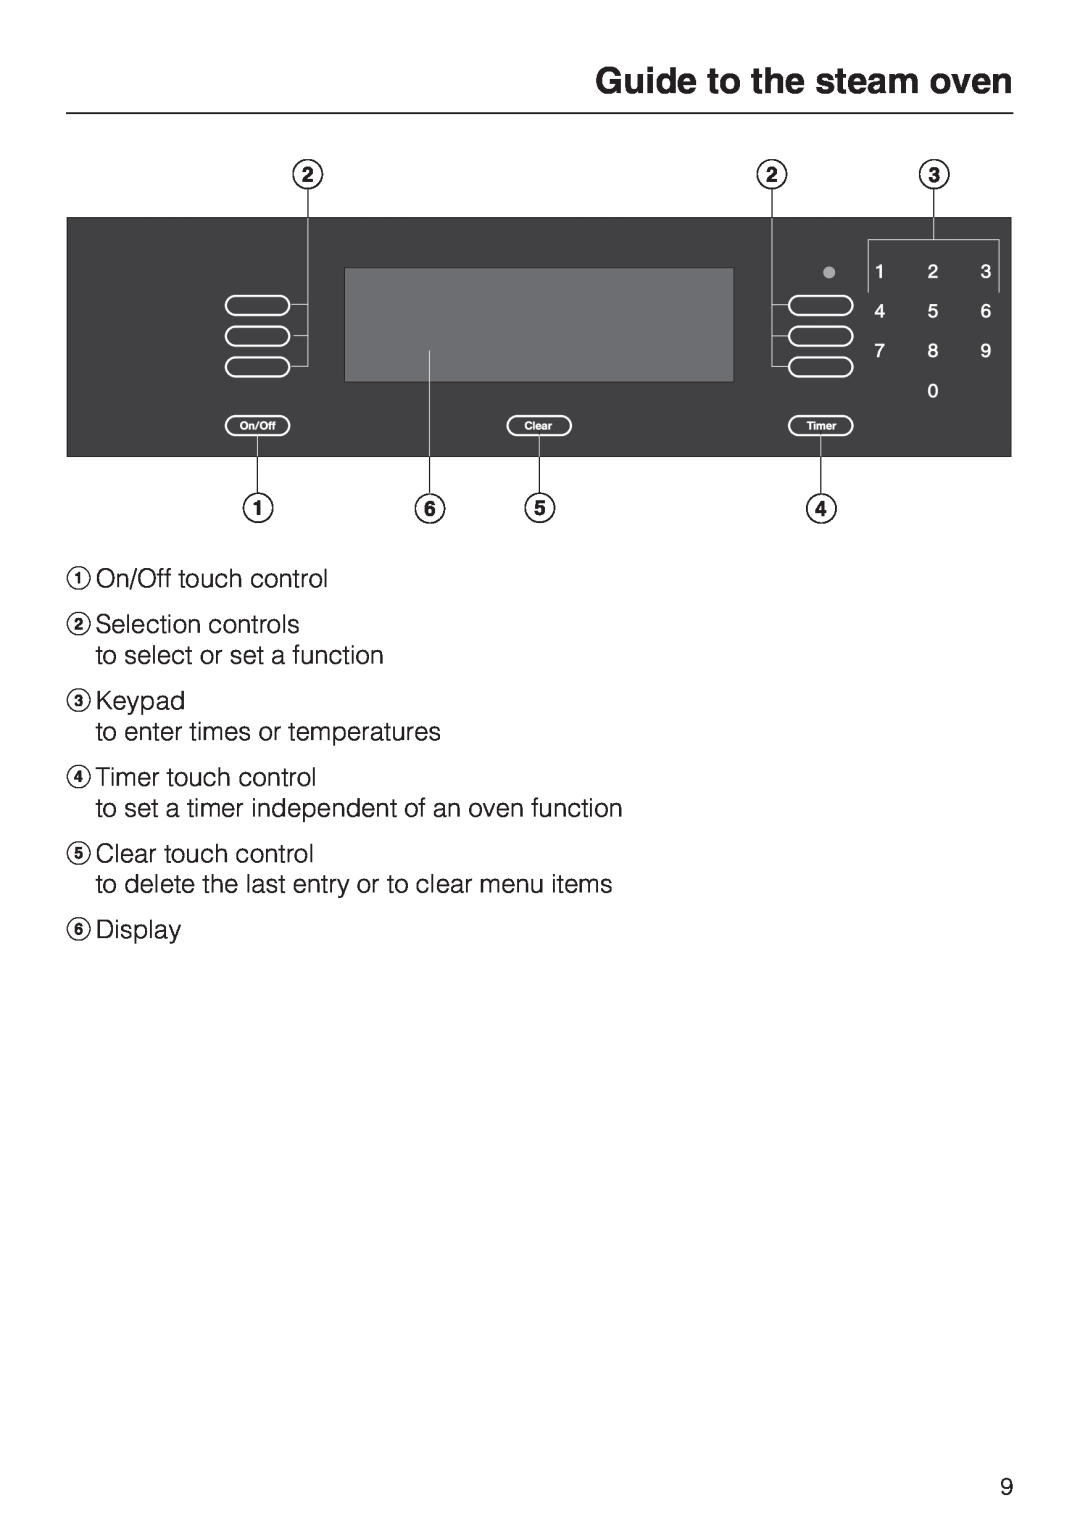 Miele DG 4088, DG4082 Guide to the steam oven, On/Off touch control Selection controls, to select or set a function Keypad 